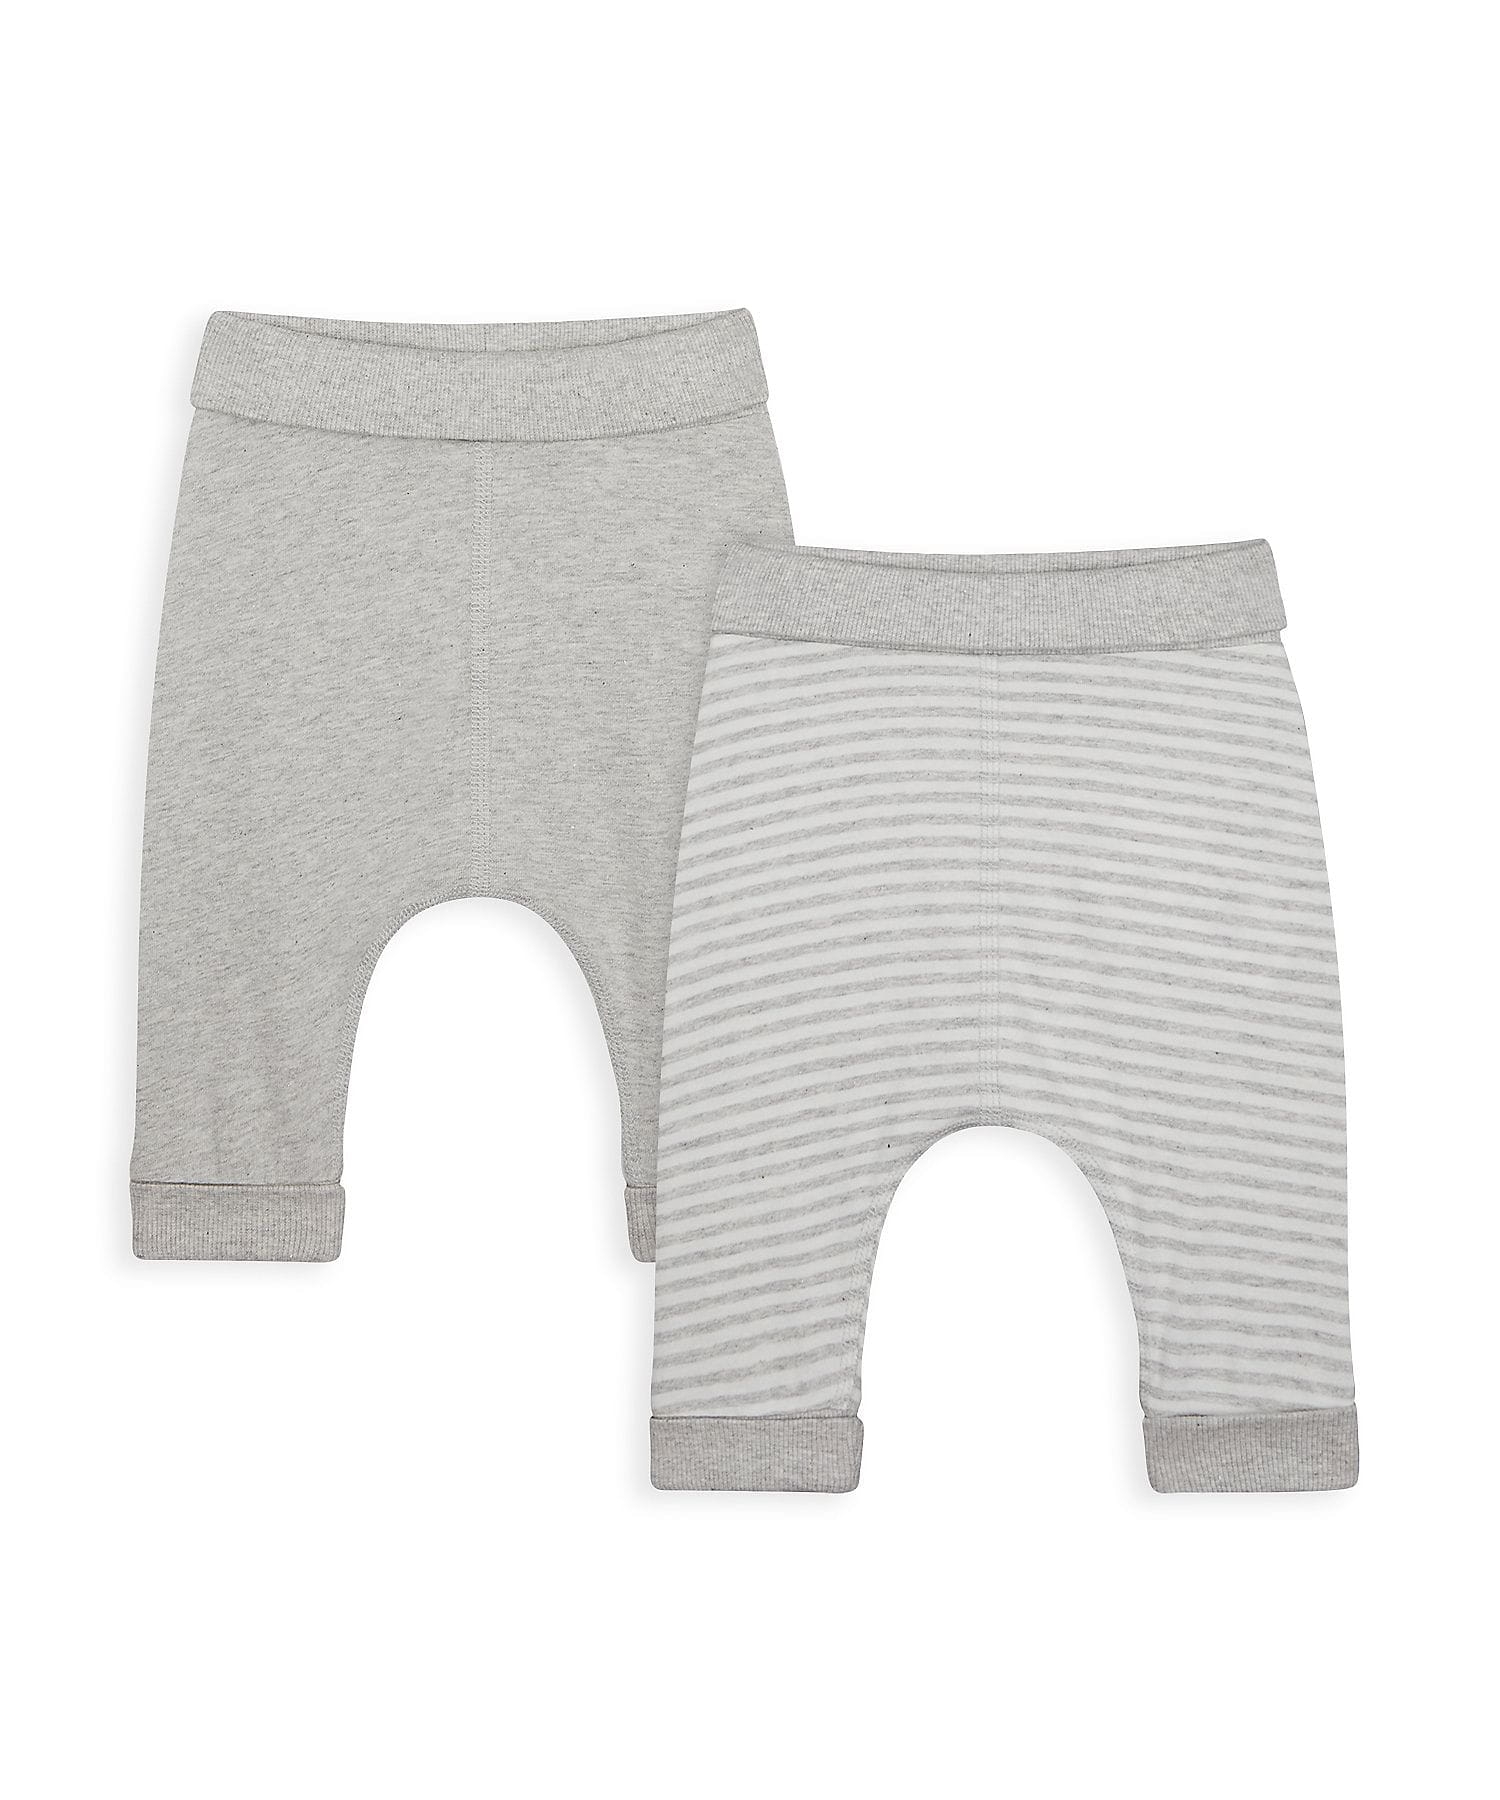 Mothercare | Unisex Joggers Striped - Pack Of 2 - Grey 0